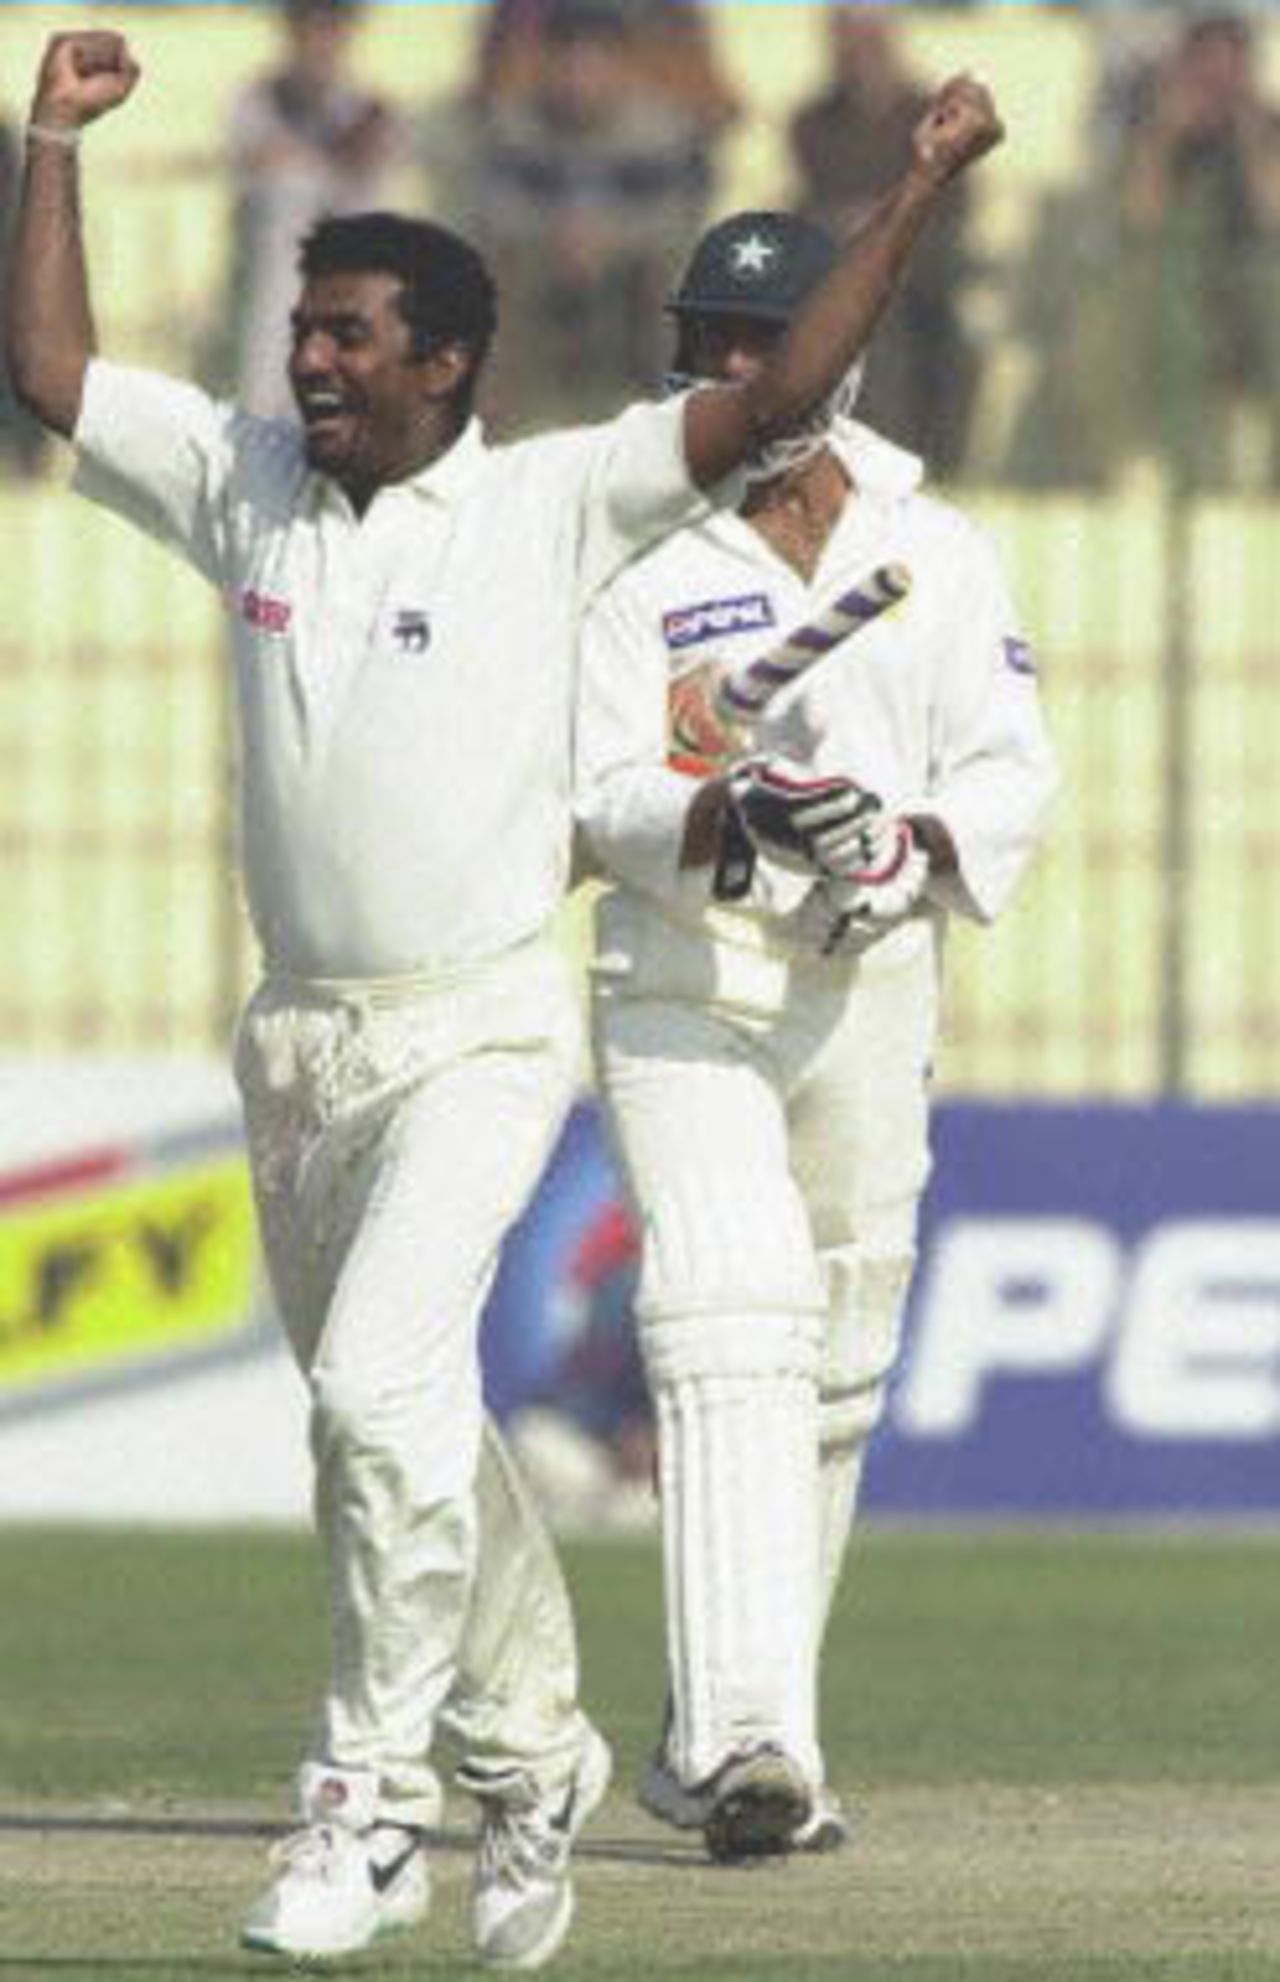 Sri Lankan off-spinner Muttiah Muralitharan (L) celebrates the fall of last the Pakistan batsman's wicket on the last day of play of the 2nd cricket Test match in Peshawar, Pakistan 09 March 2000. Muralitharan took 6-71 while collecting ten wickets in the match and was declared Man of the Match. Sri Lanka defeated Pakistan by 57 runs and won the three Test series 2-0.